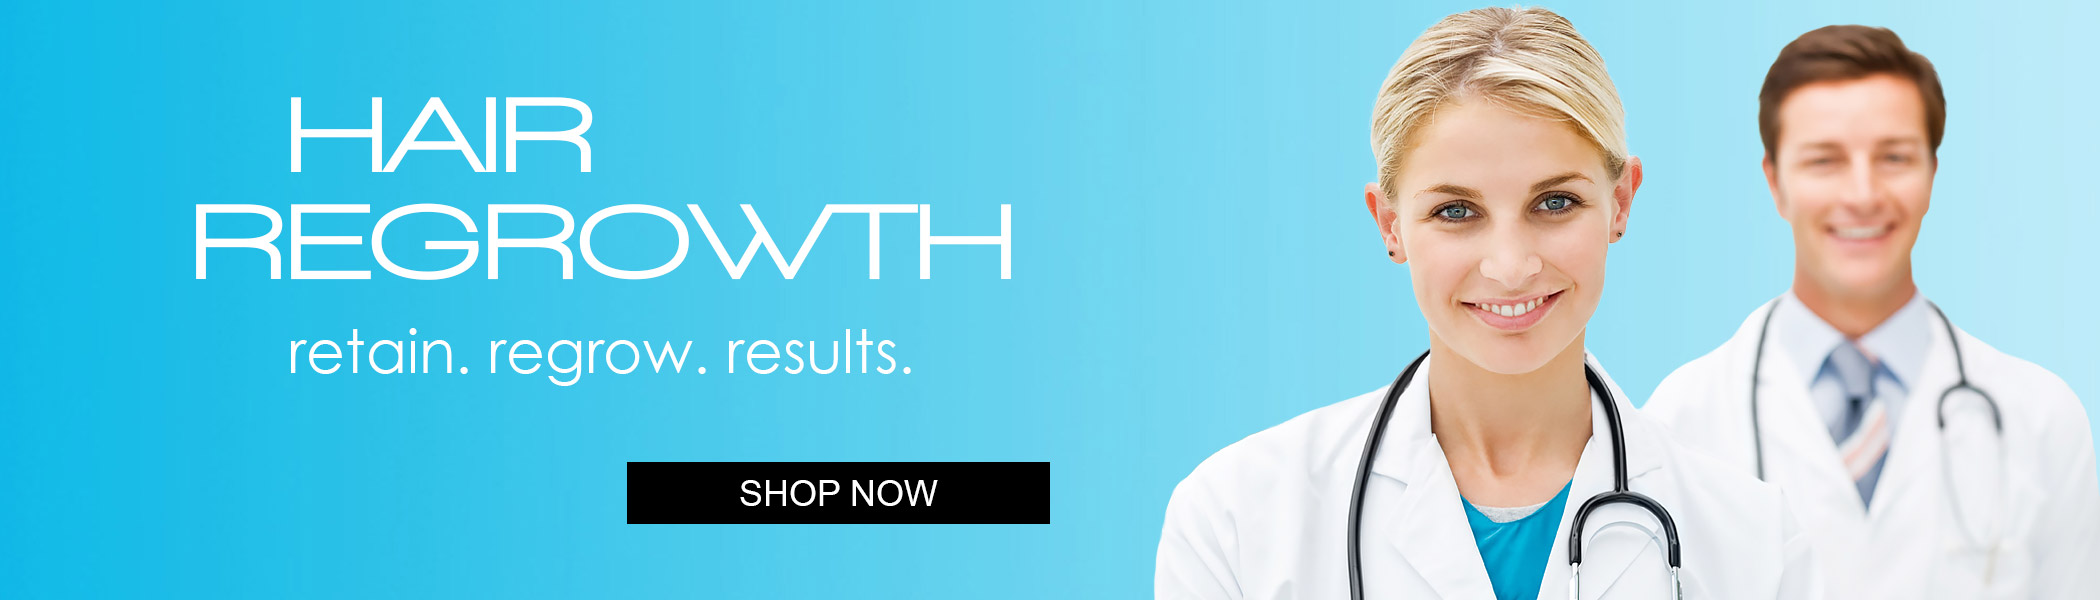 Hair Regrowth Australia - World's No.1 Brands in Hair Loss Products